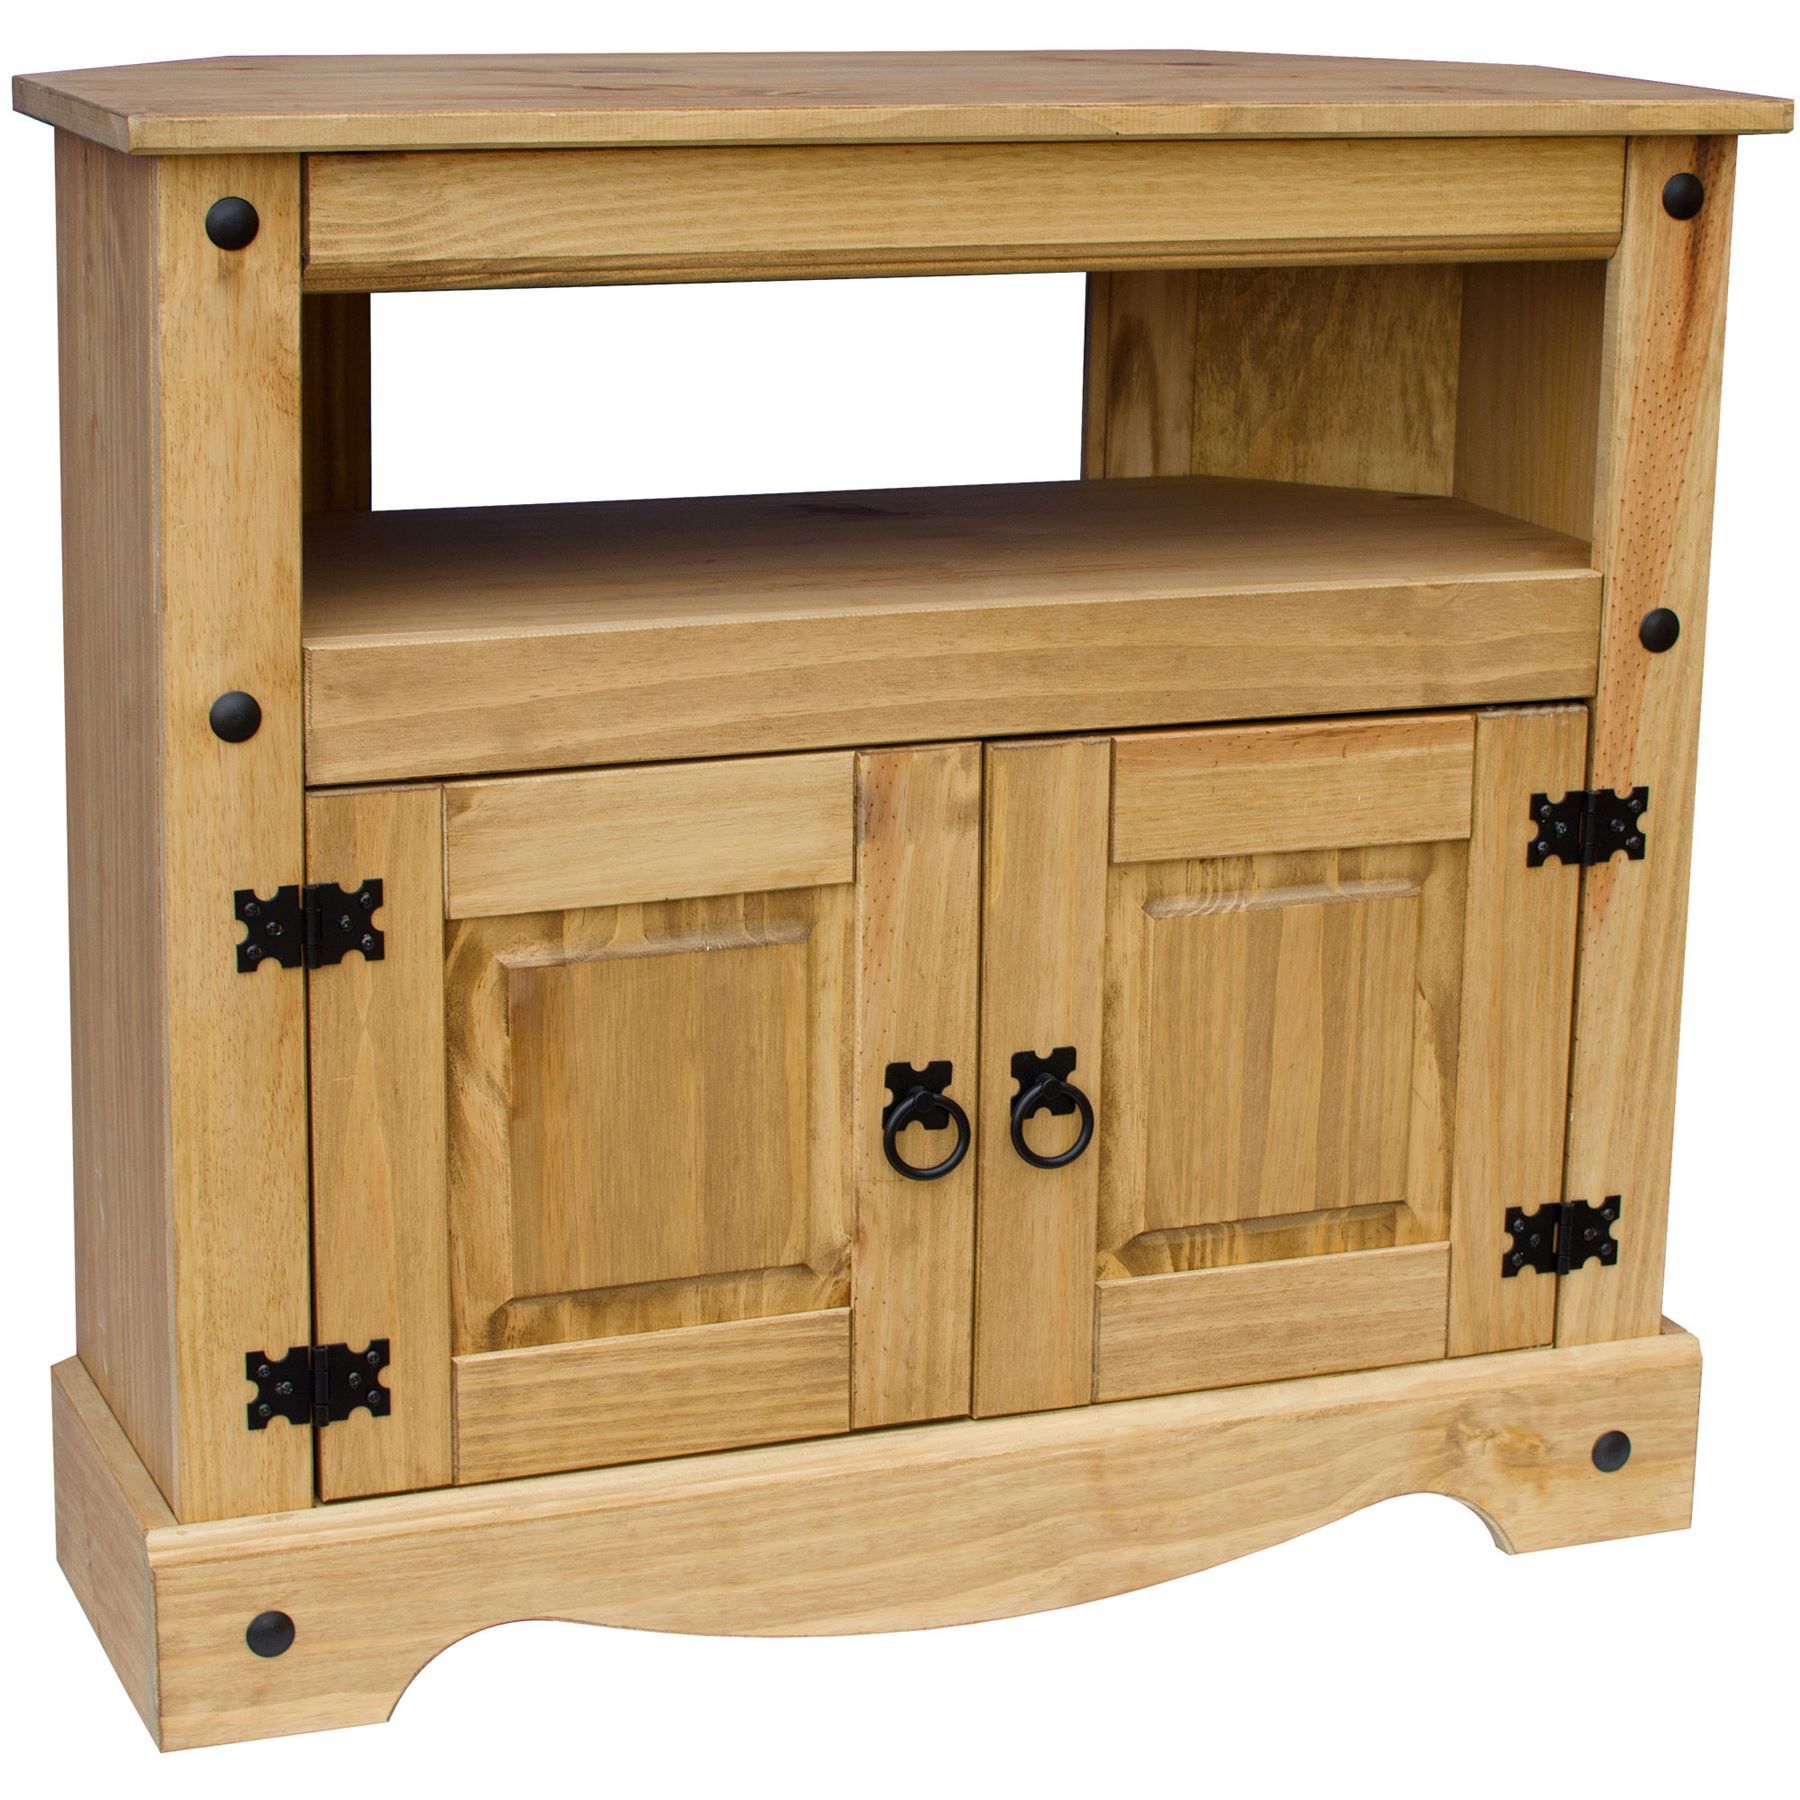 Corona Panama Tv Cabinet Media Dvd Unit Solid Pine Wood With Rustic Pine Tv Cabinets (View 7 of 15)